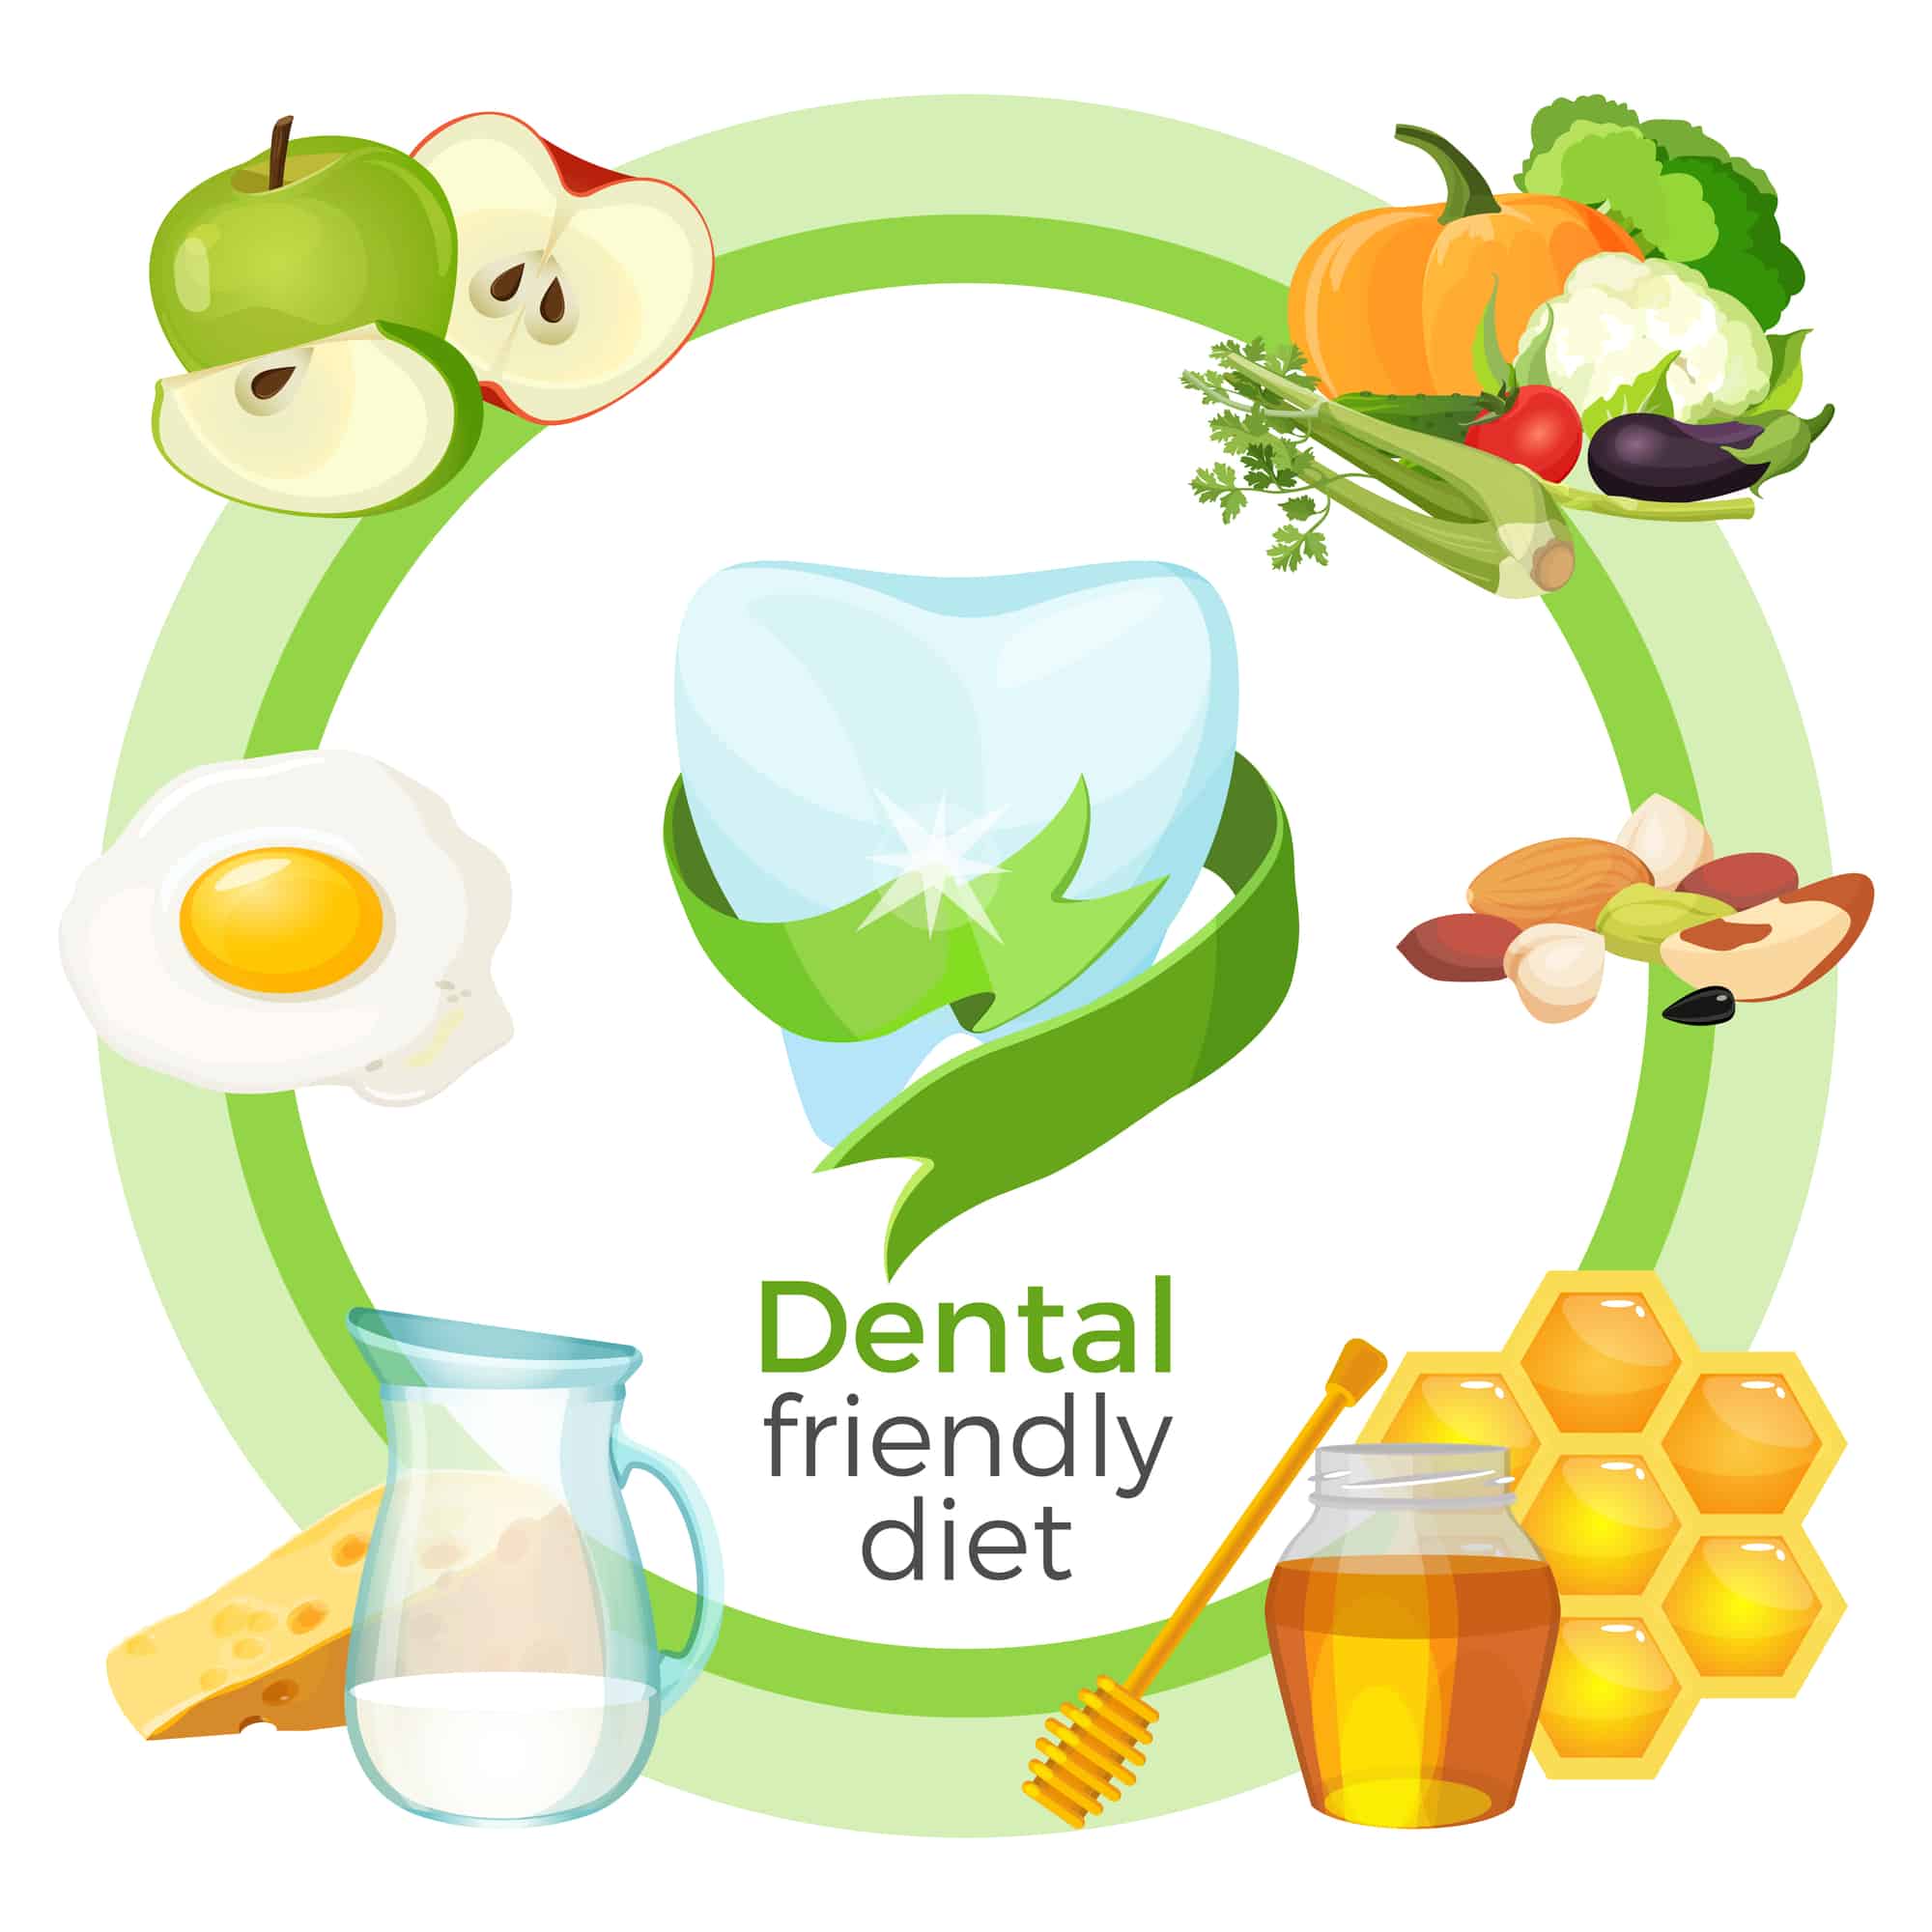 Dental friendly diet, poster with products placed in circles border, apple and vegetables, egg and milk with cheese, honey and nuts on vector illustration